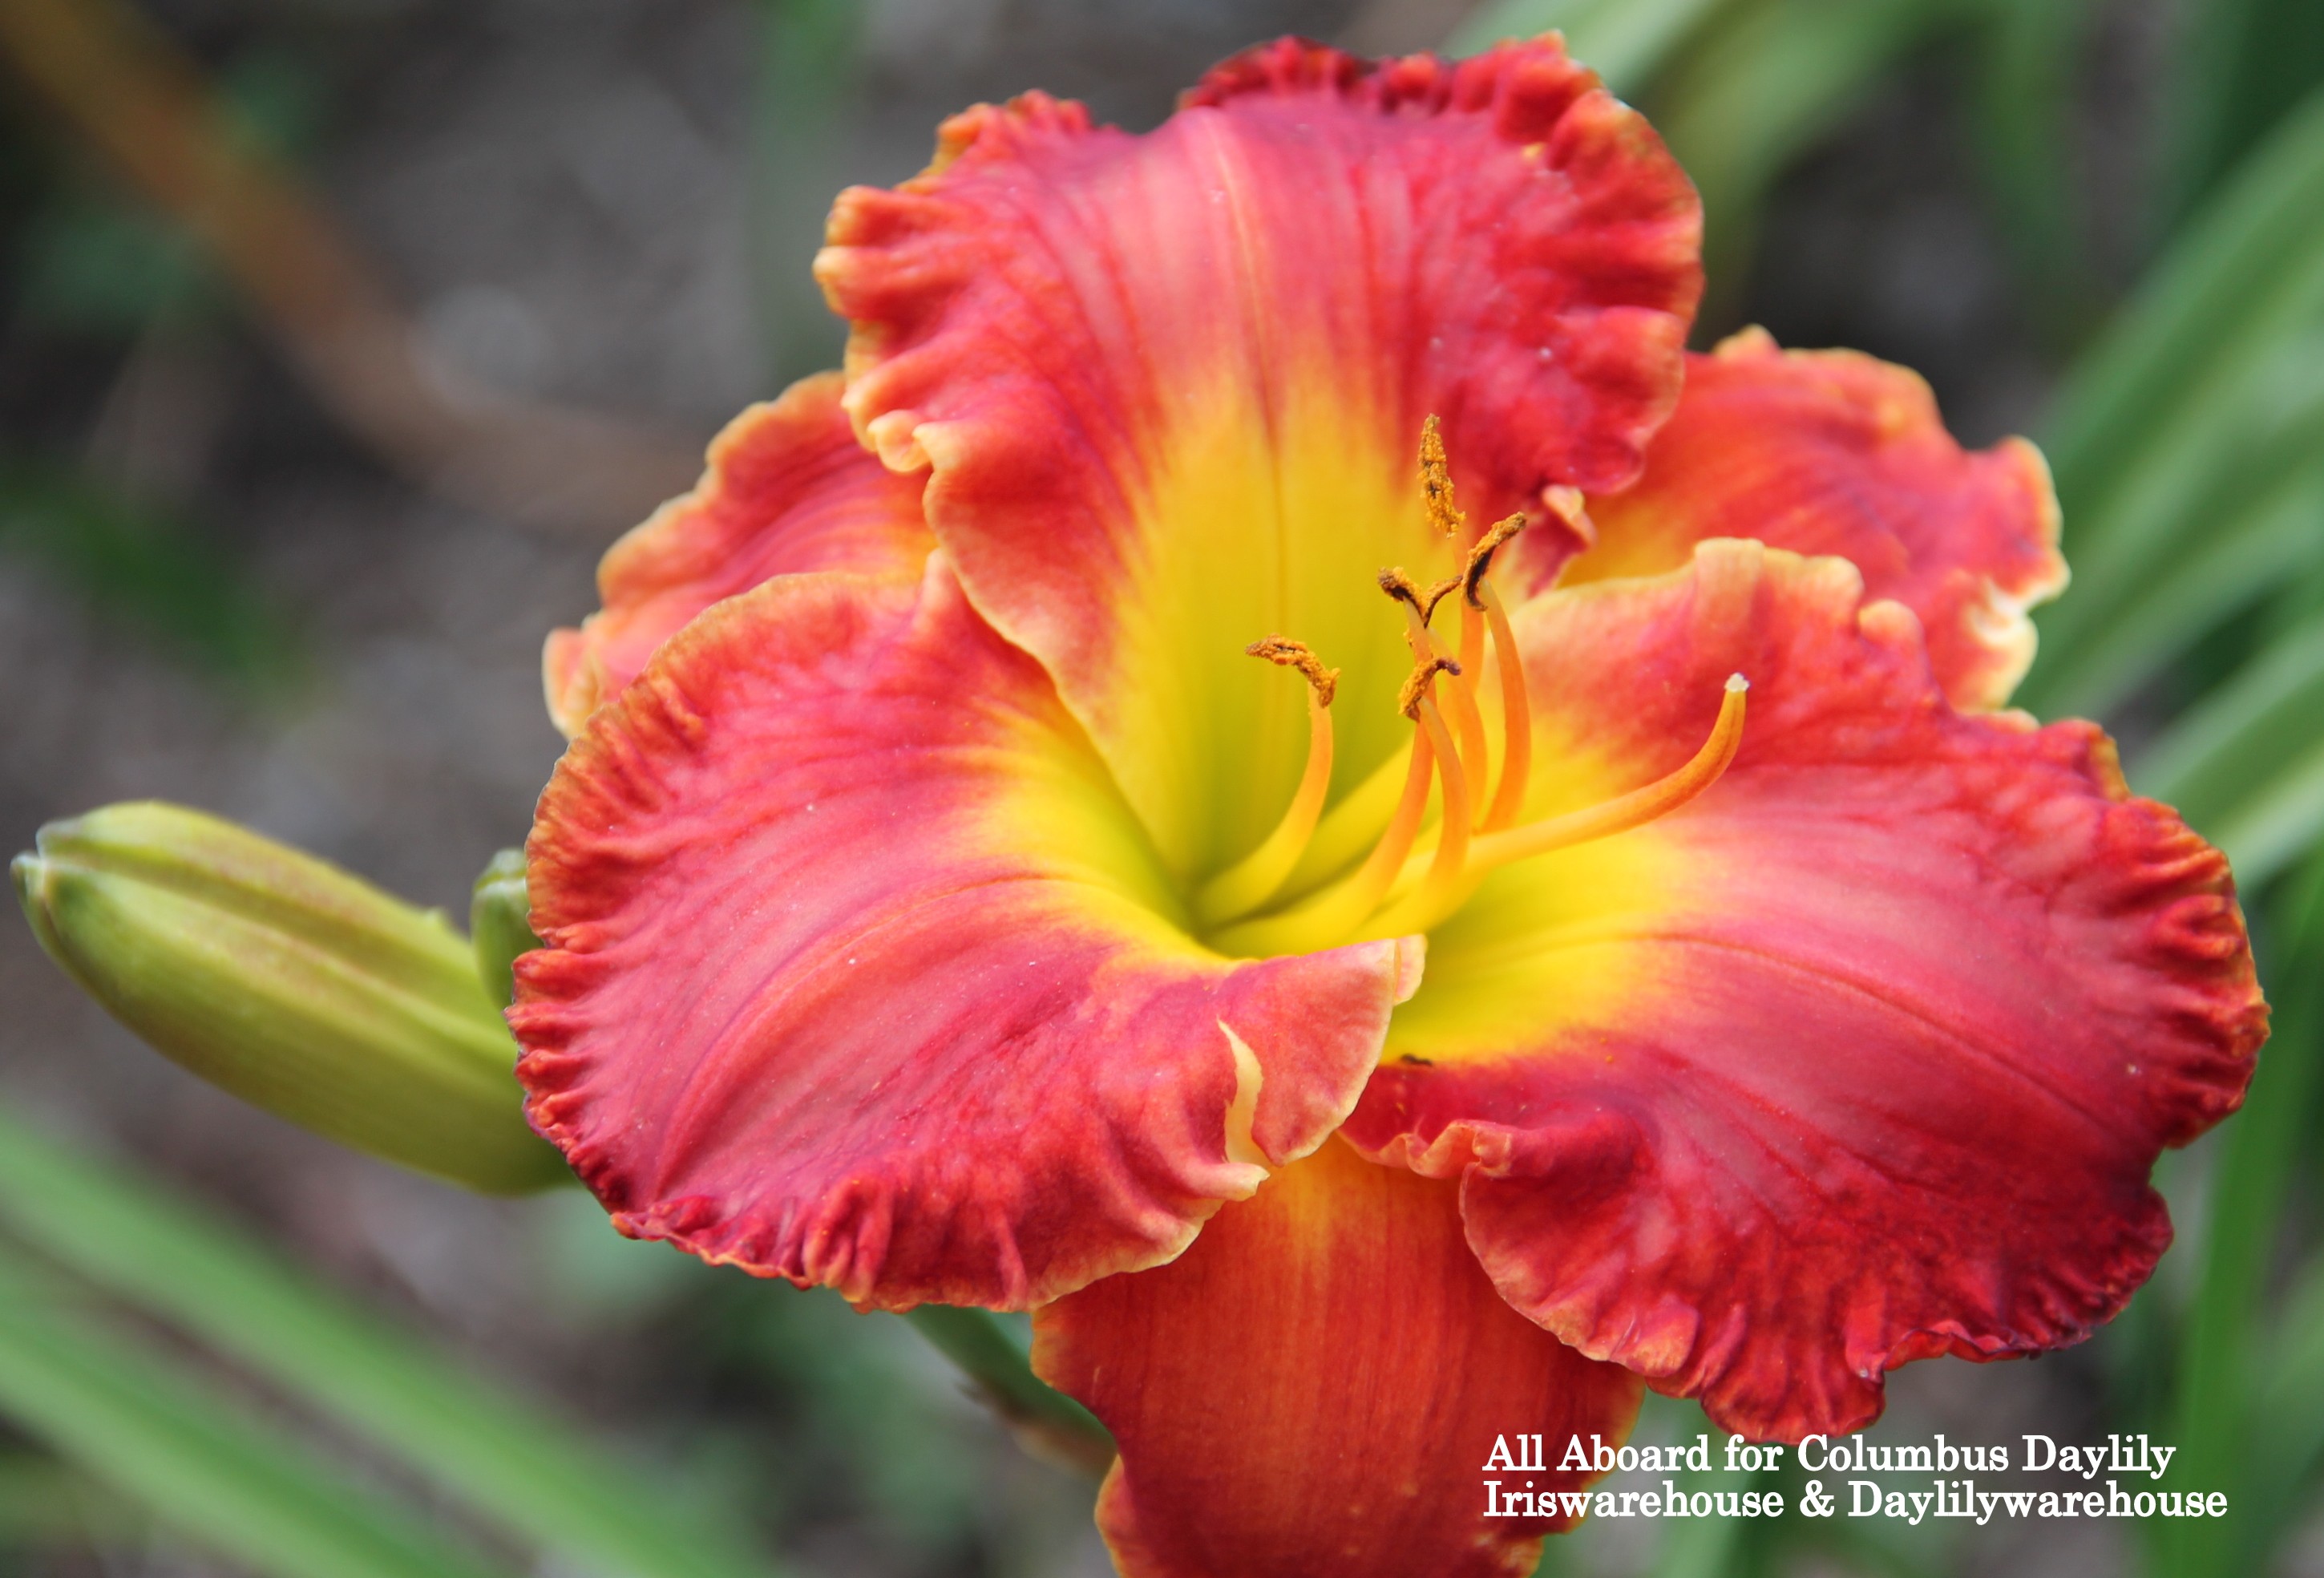 All Aboard For Columbus Daylily